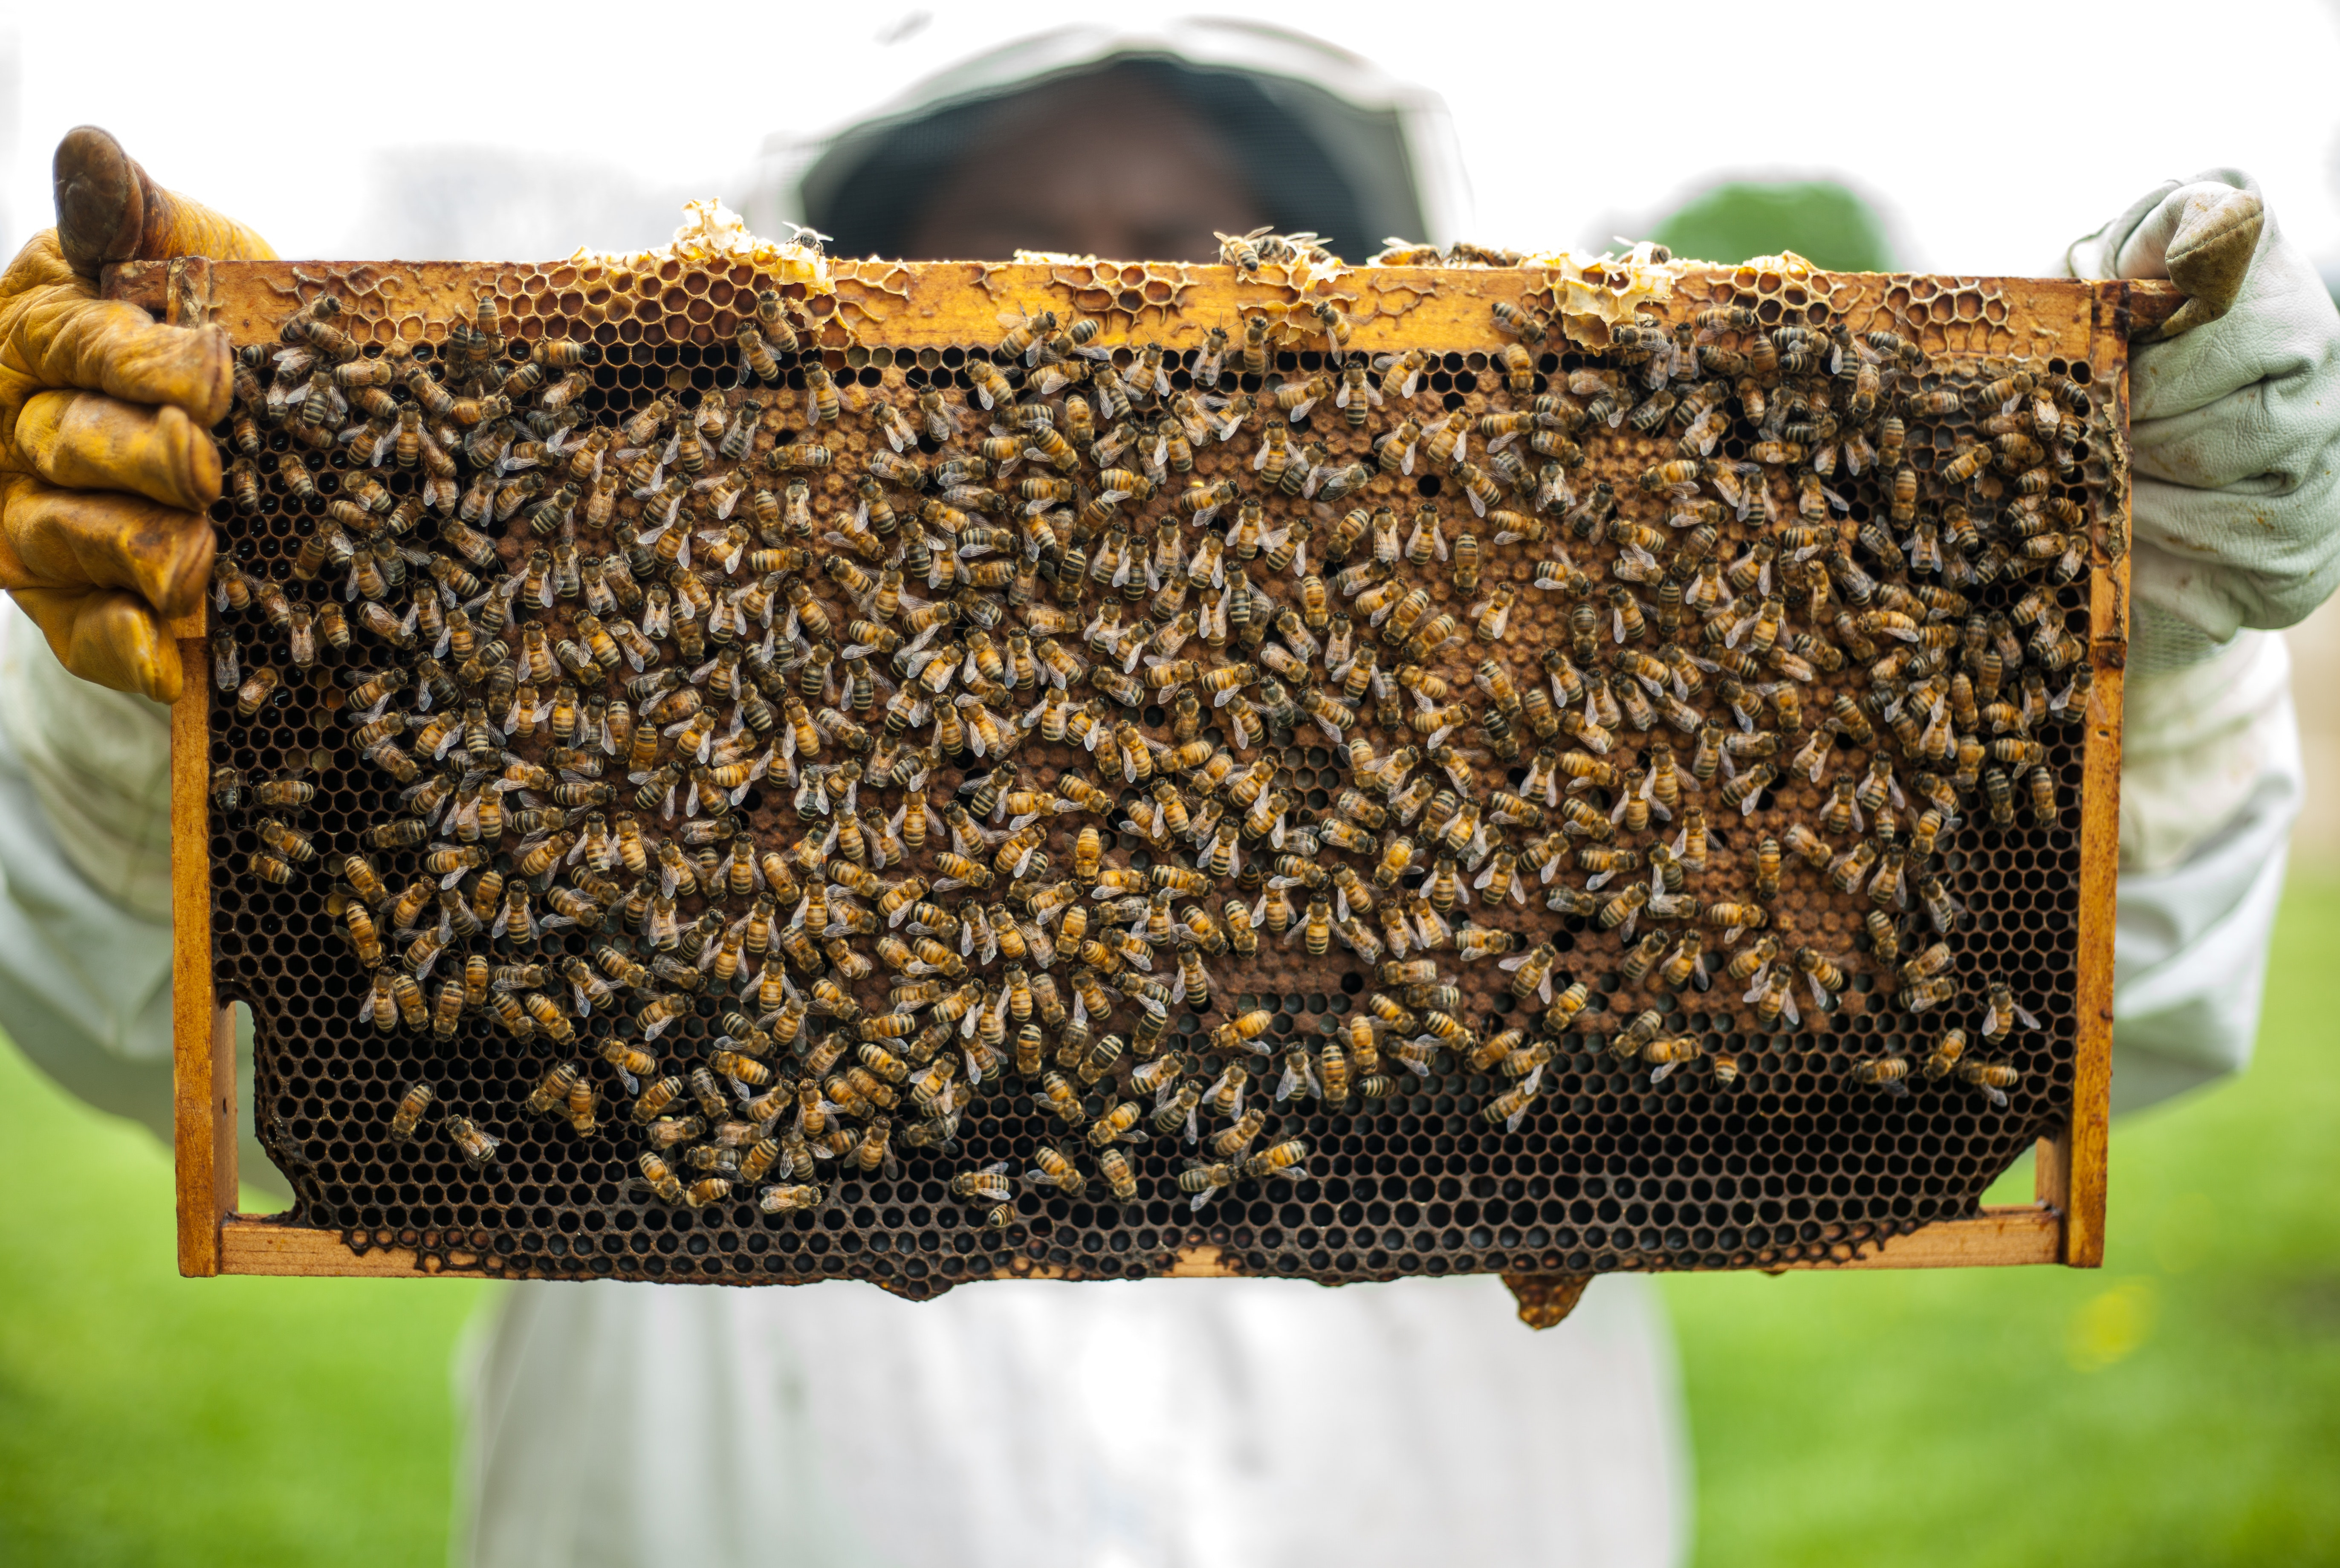 honeybees in agriculture